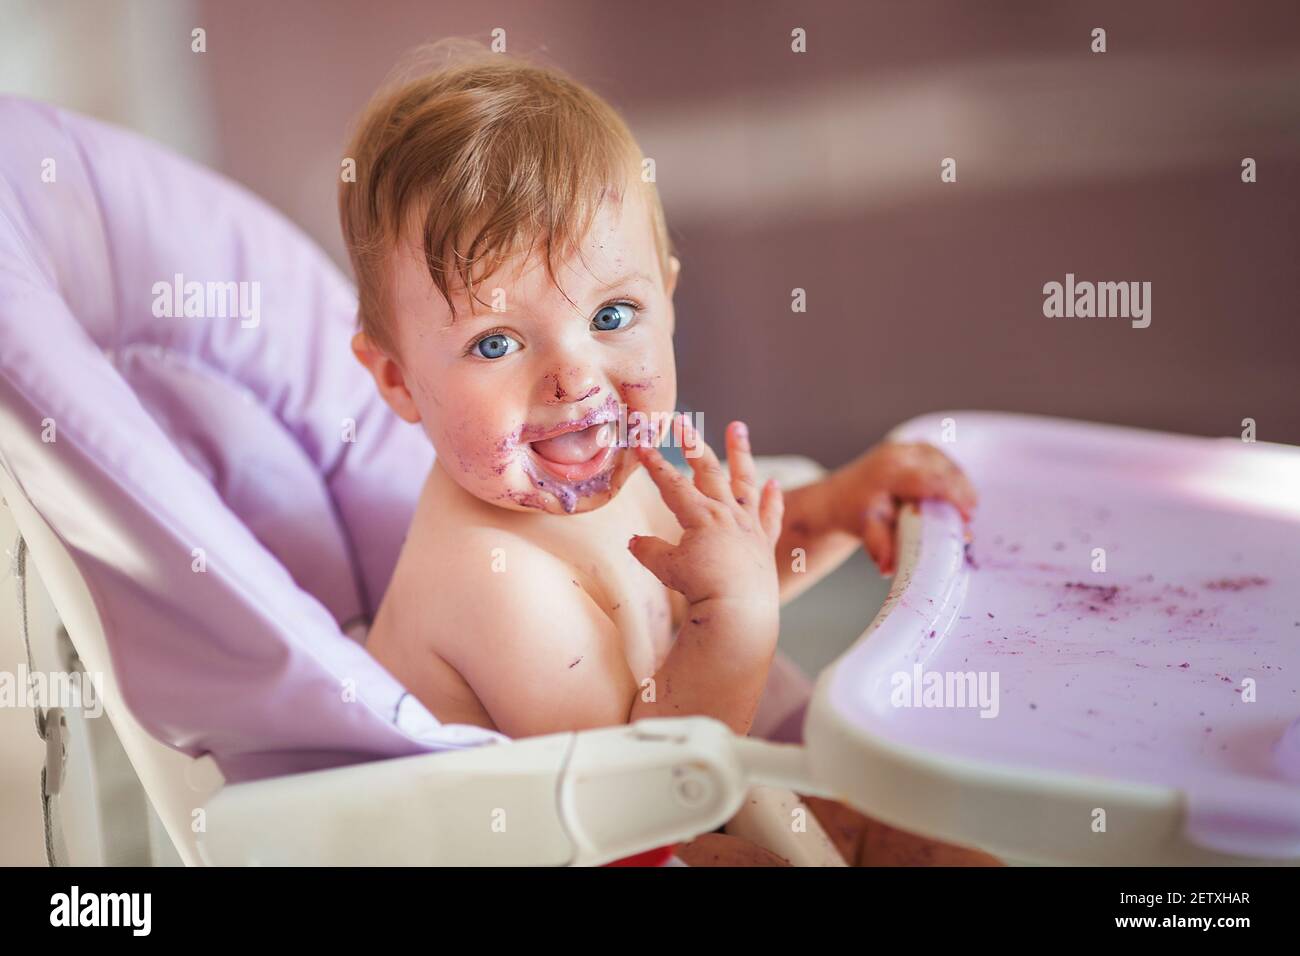 Adorable baby eating on baby chair and making a mess. Little baby girl eating food. Cute baby with a funny expression on his face. Stock Photo